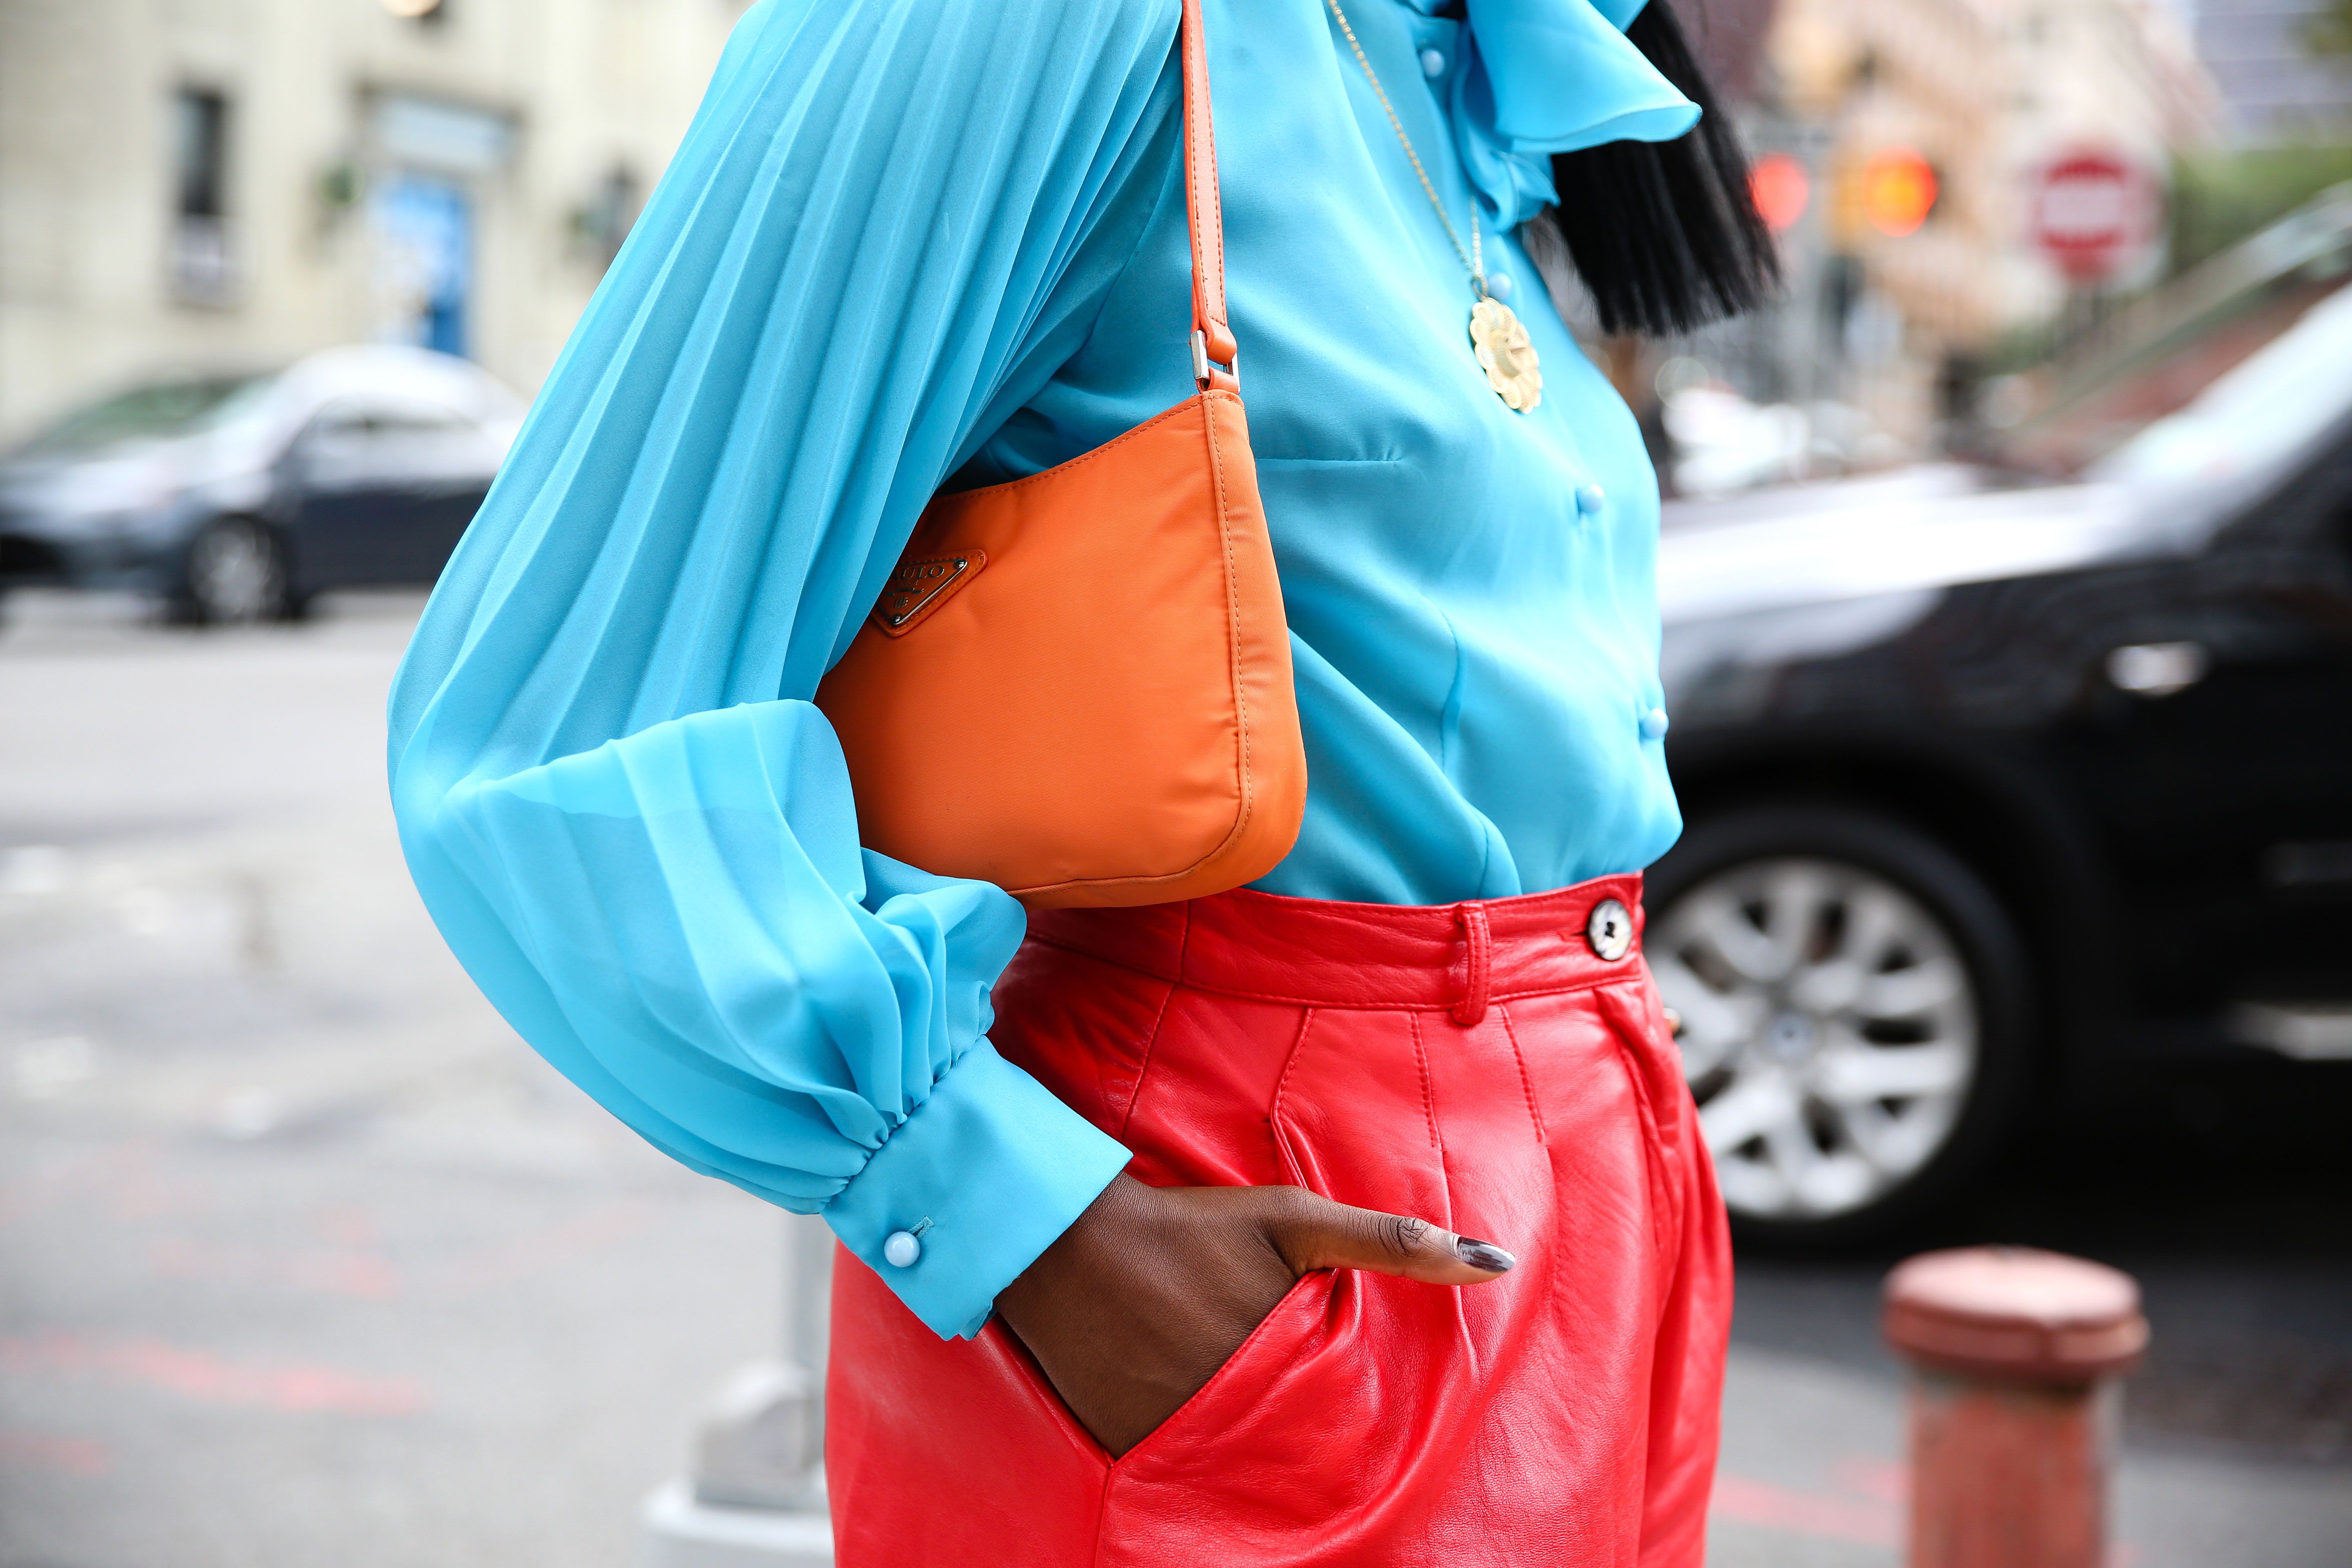 The 7 Best Bag Trends For Grow Up Women In 2020 - Elle Muse